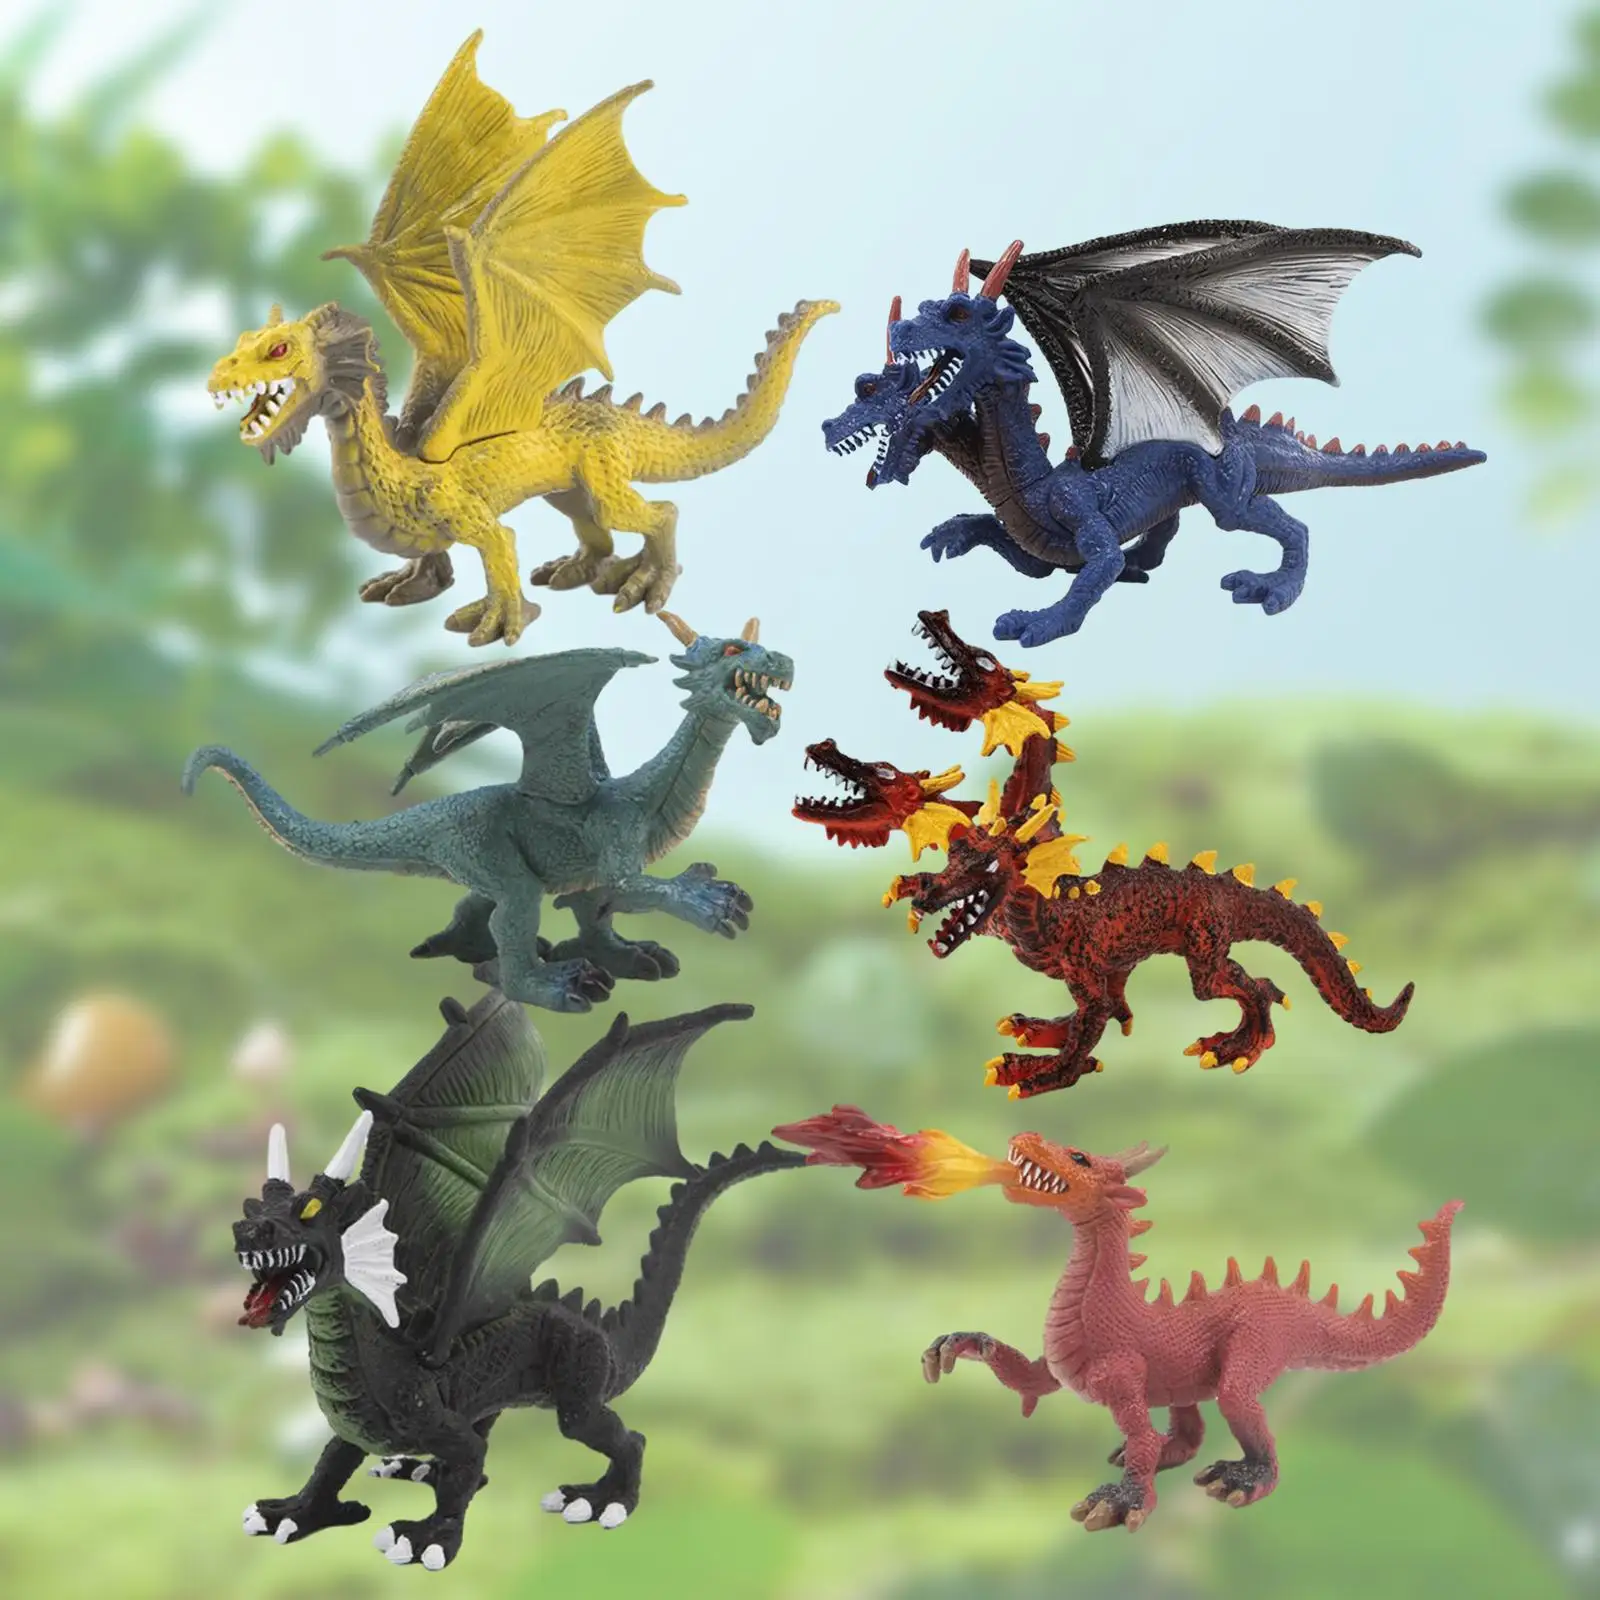 6x Dragon Figurines Doll Dragon Figures Realistic Action Figurine for Party Favor Birthday Collection Rewards Teaching Props